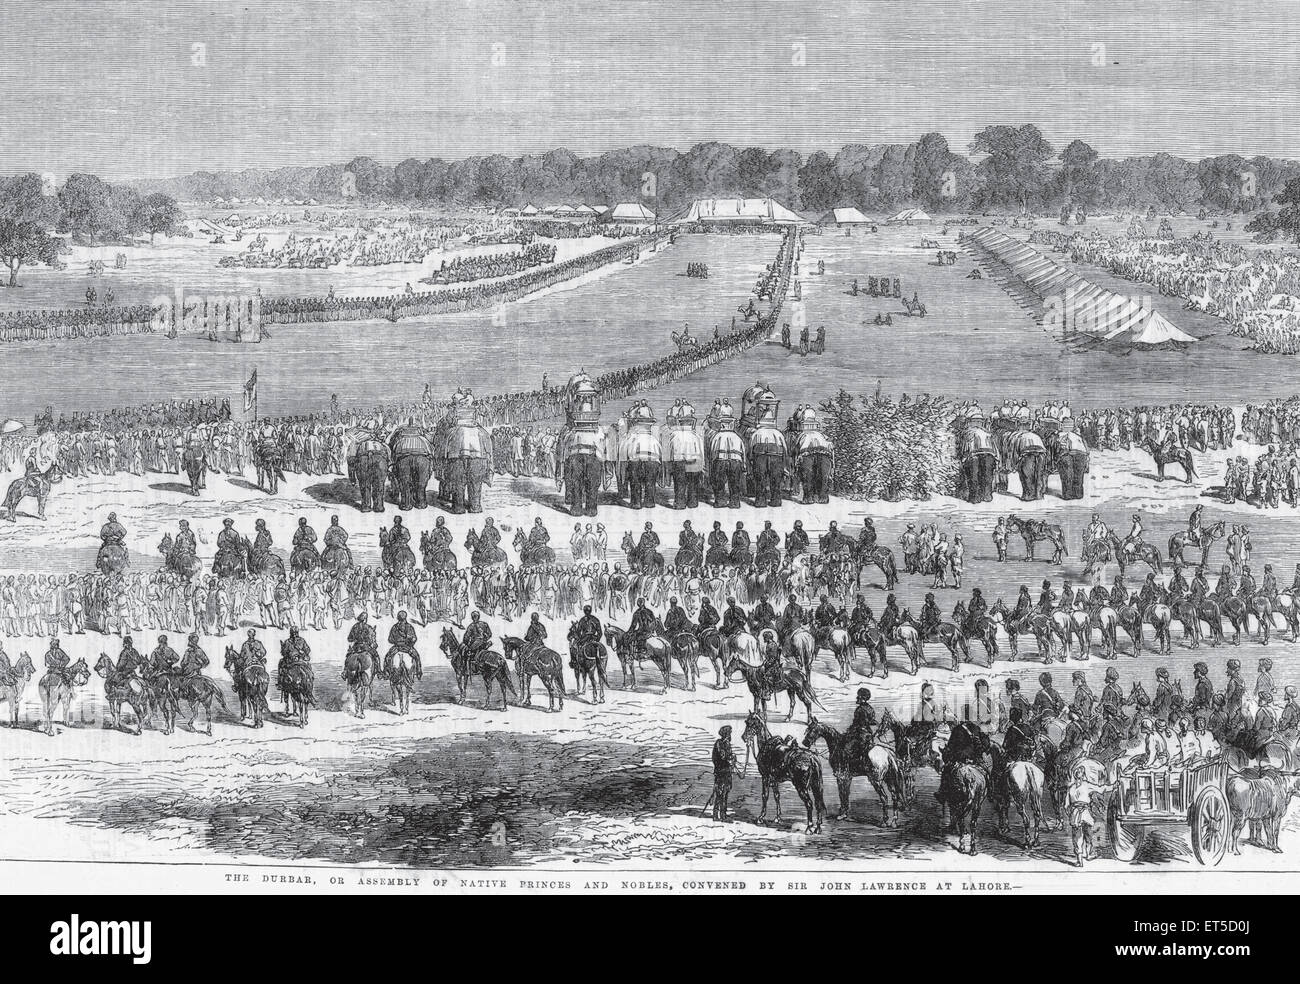 The Durbar, assembly of Princes, convened by Sir John Lawrence, Viceroy of India, Lahore ; Pakistan ; old vintage 1800s engraving Stock Photo